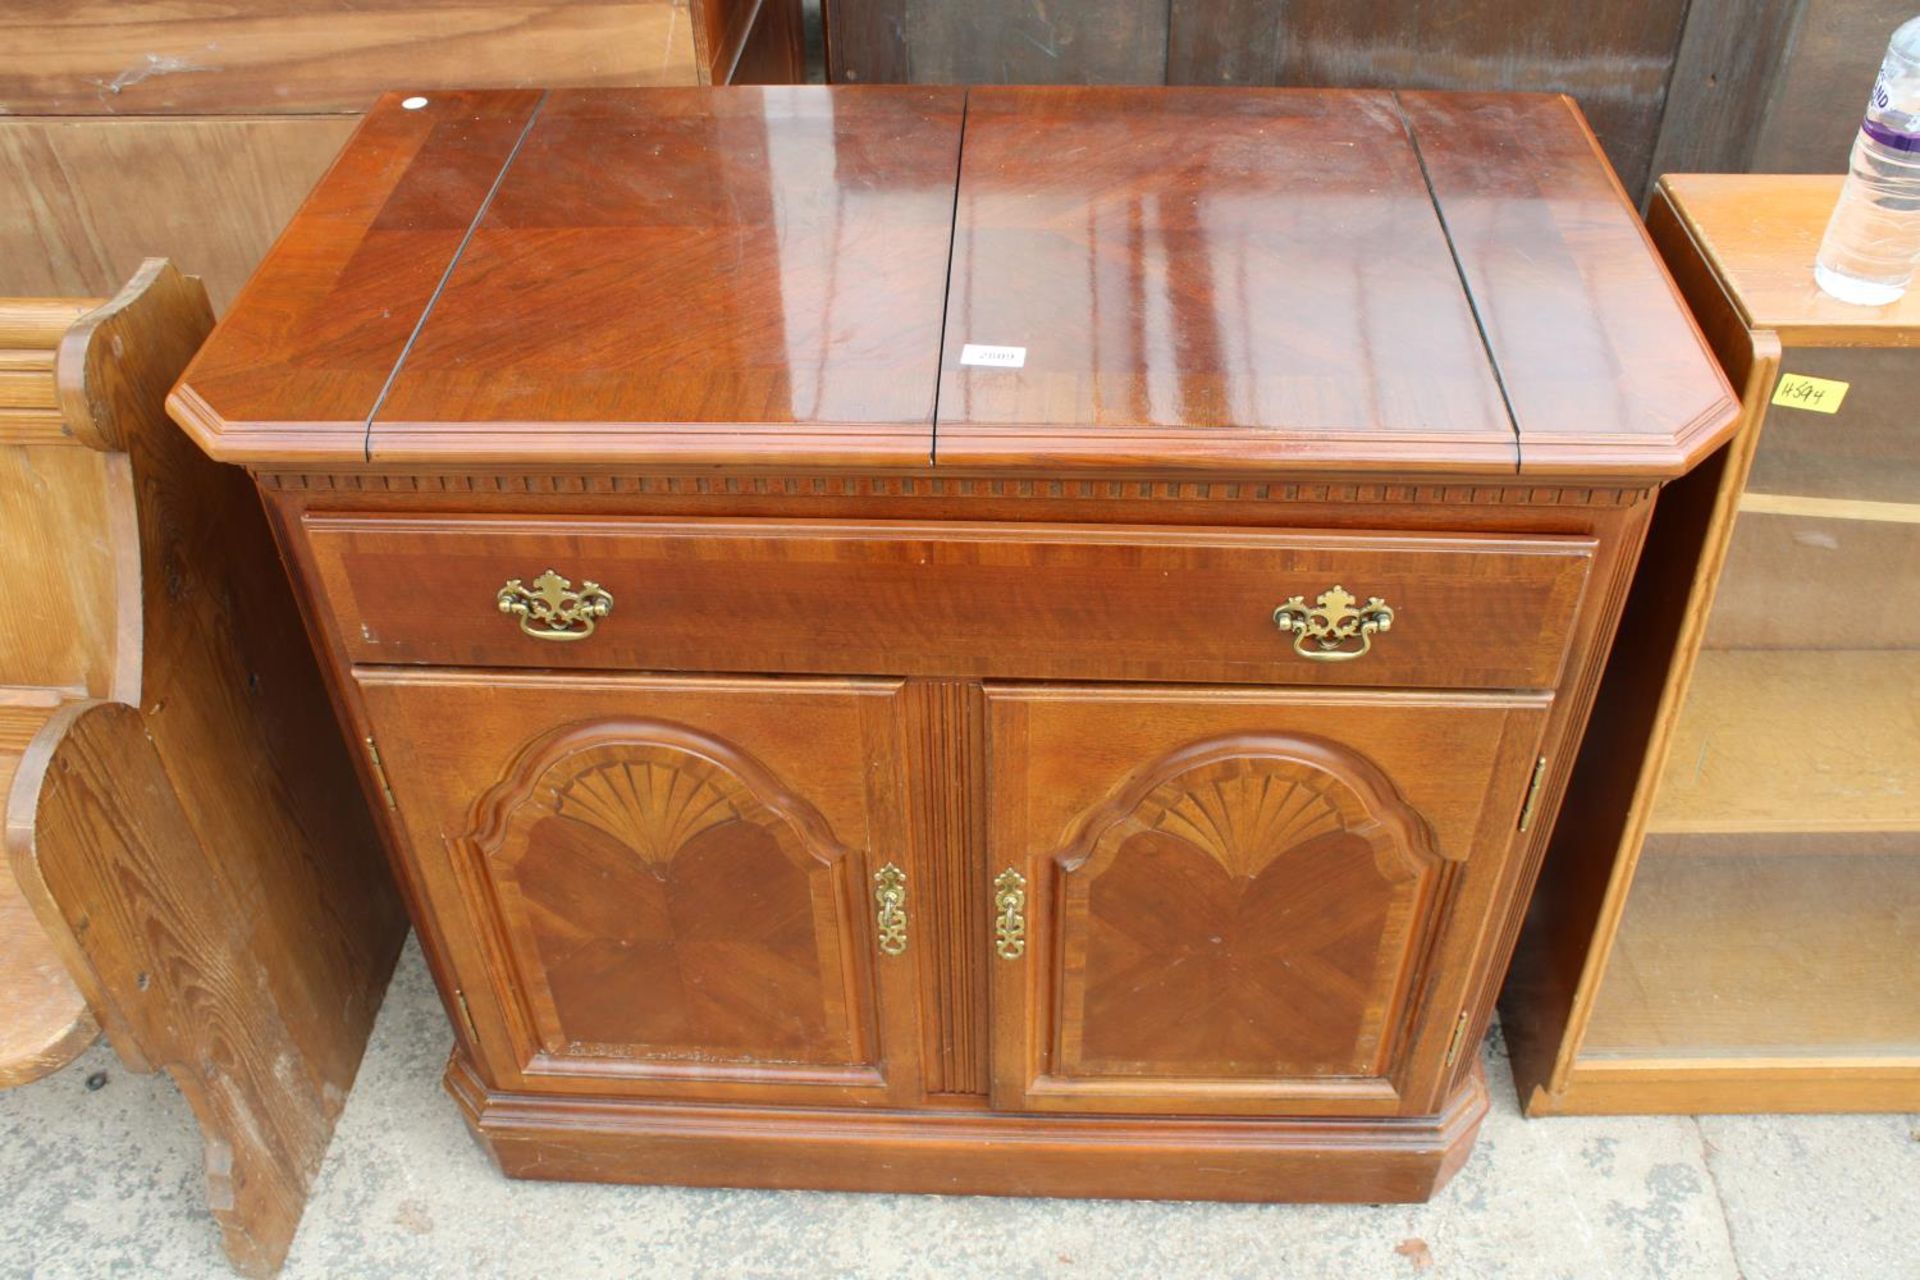 A MODERN HARDWOOD SIDEBOARD/BUFFET CABINET WITH FOLD-OVER TOP, SINGLE DRAWER AND TWO CUPBOARDS,